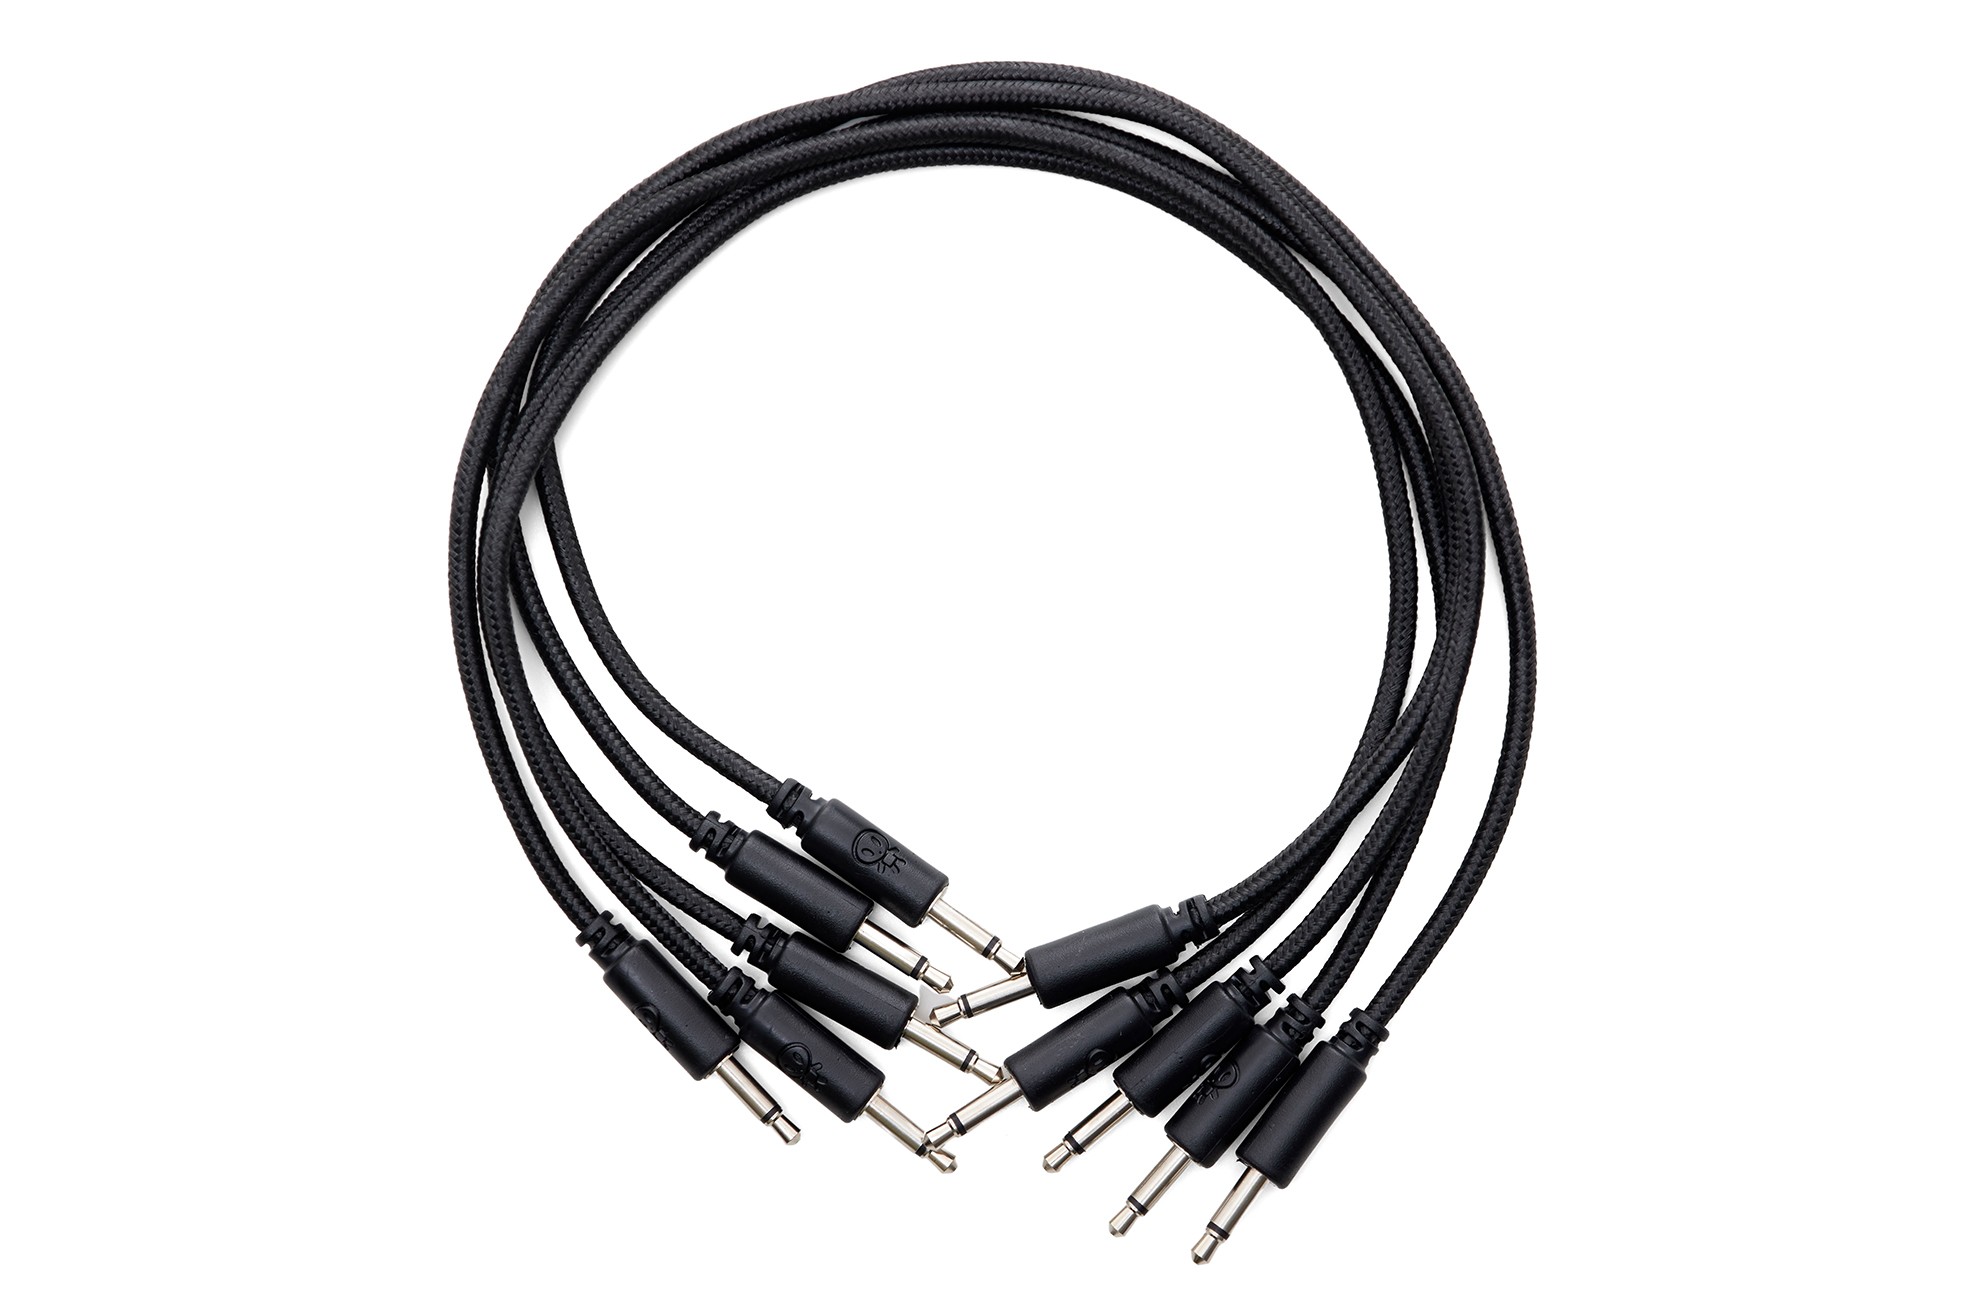 Erica Synths Braided Eurorack Patch Cables 30cm (5 pcs) - Black